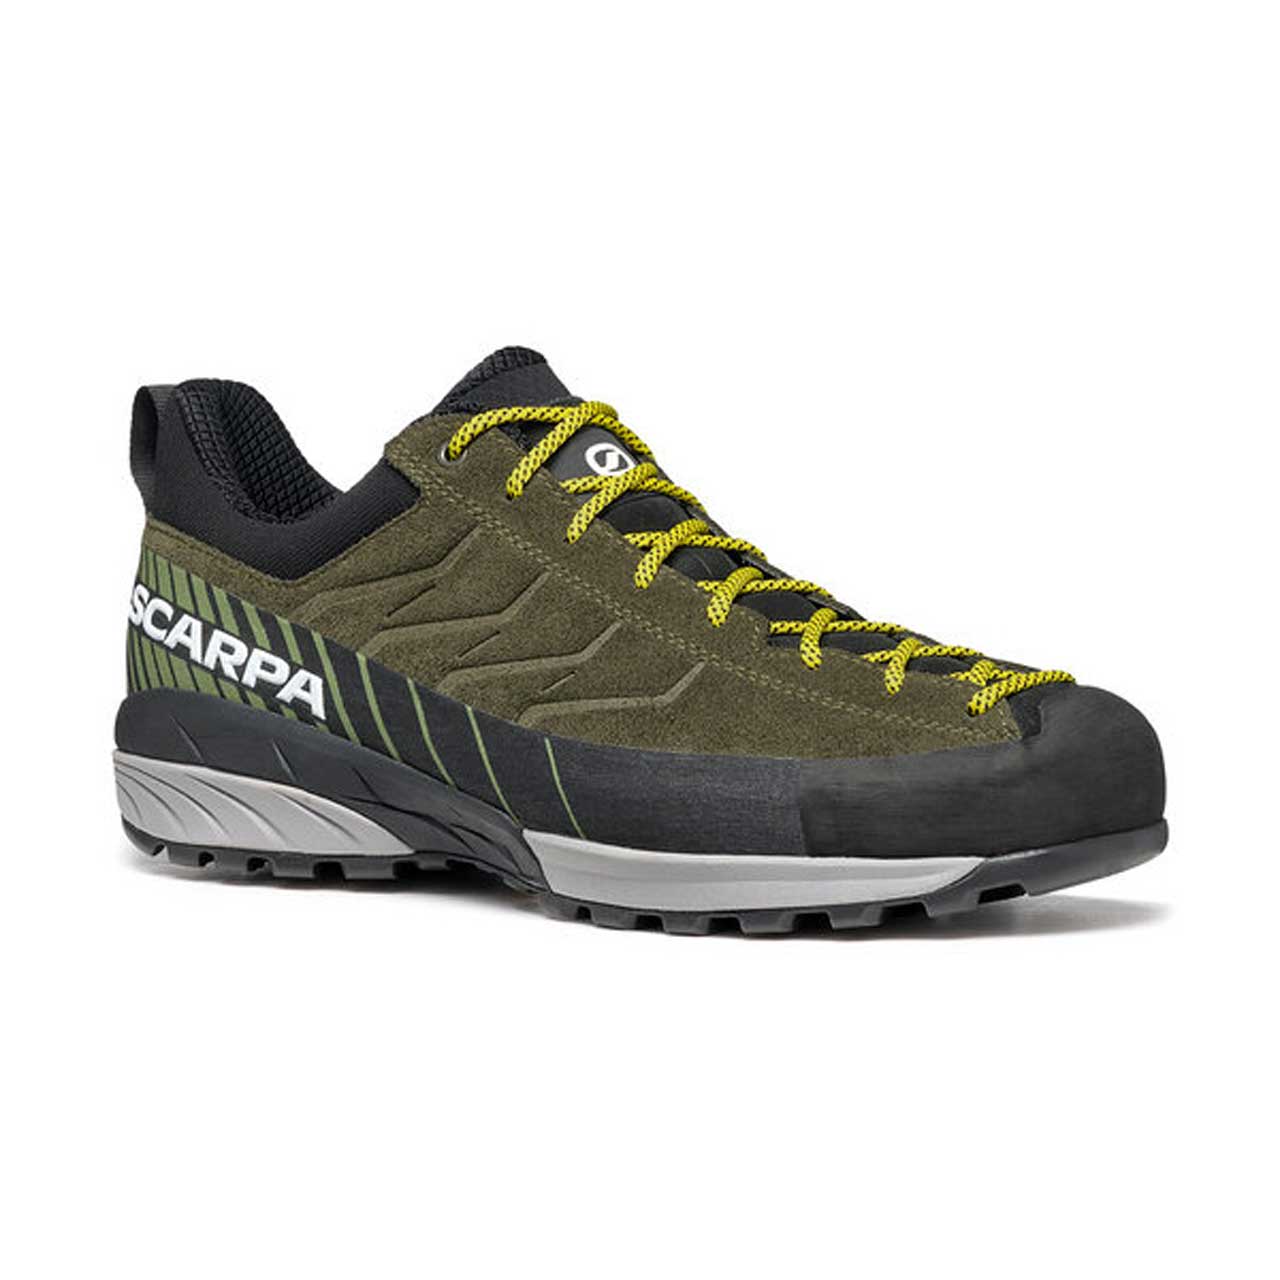 Scarpa Mescalito - Thyme Green/Forest, 42.5